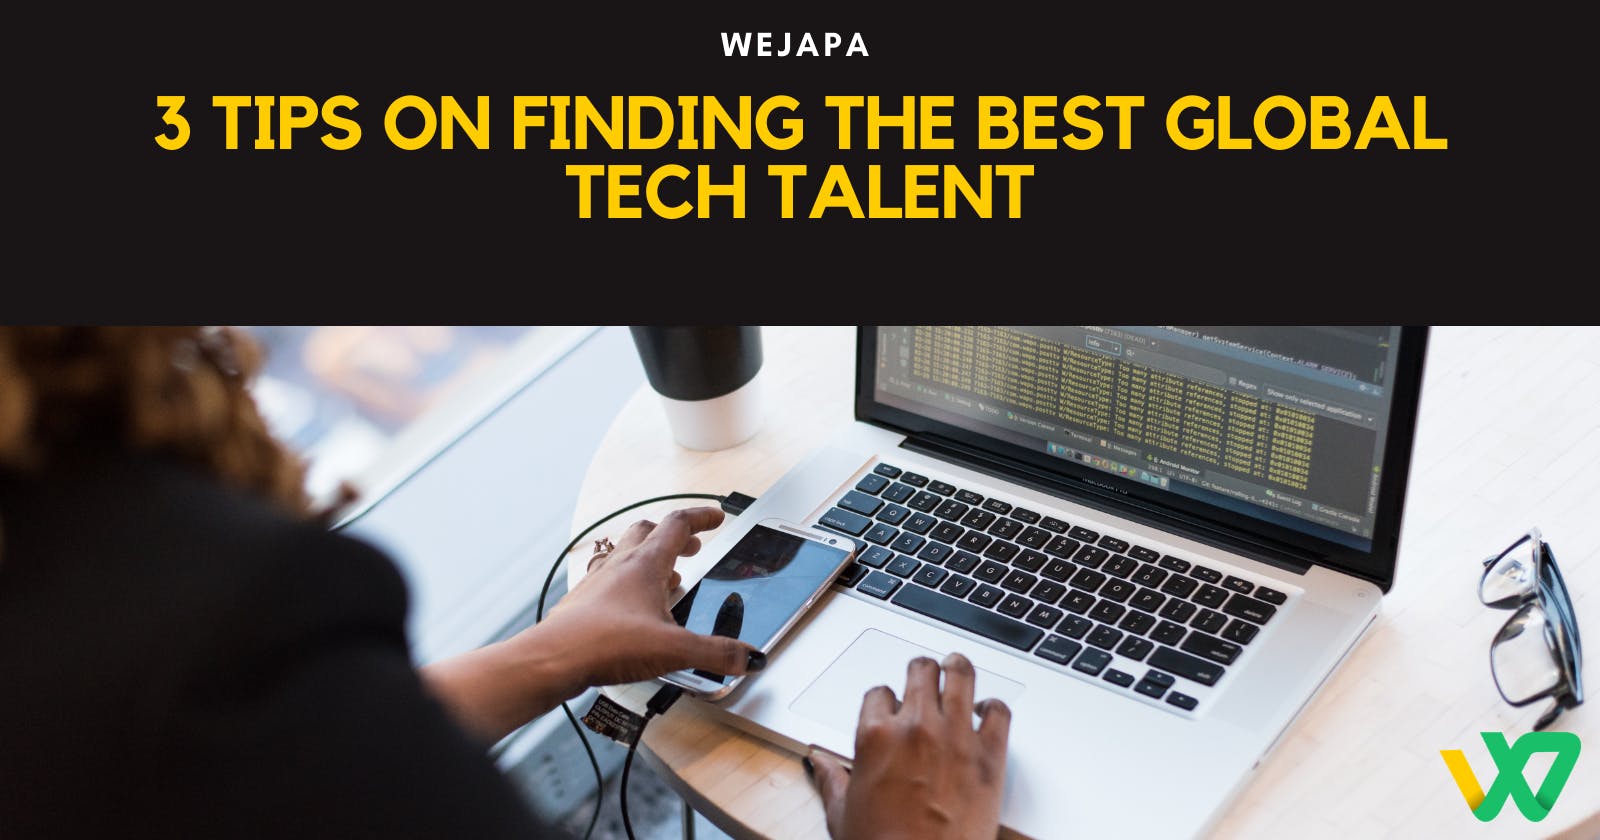 3 Tips on Finding the Best Global Tech Talent